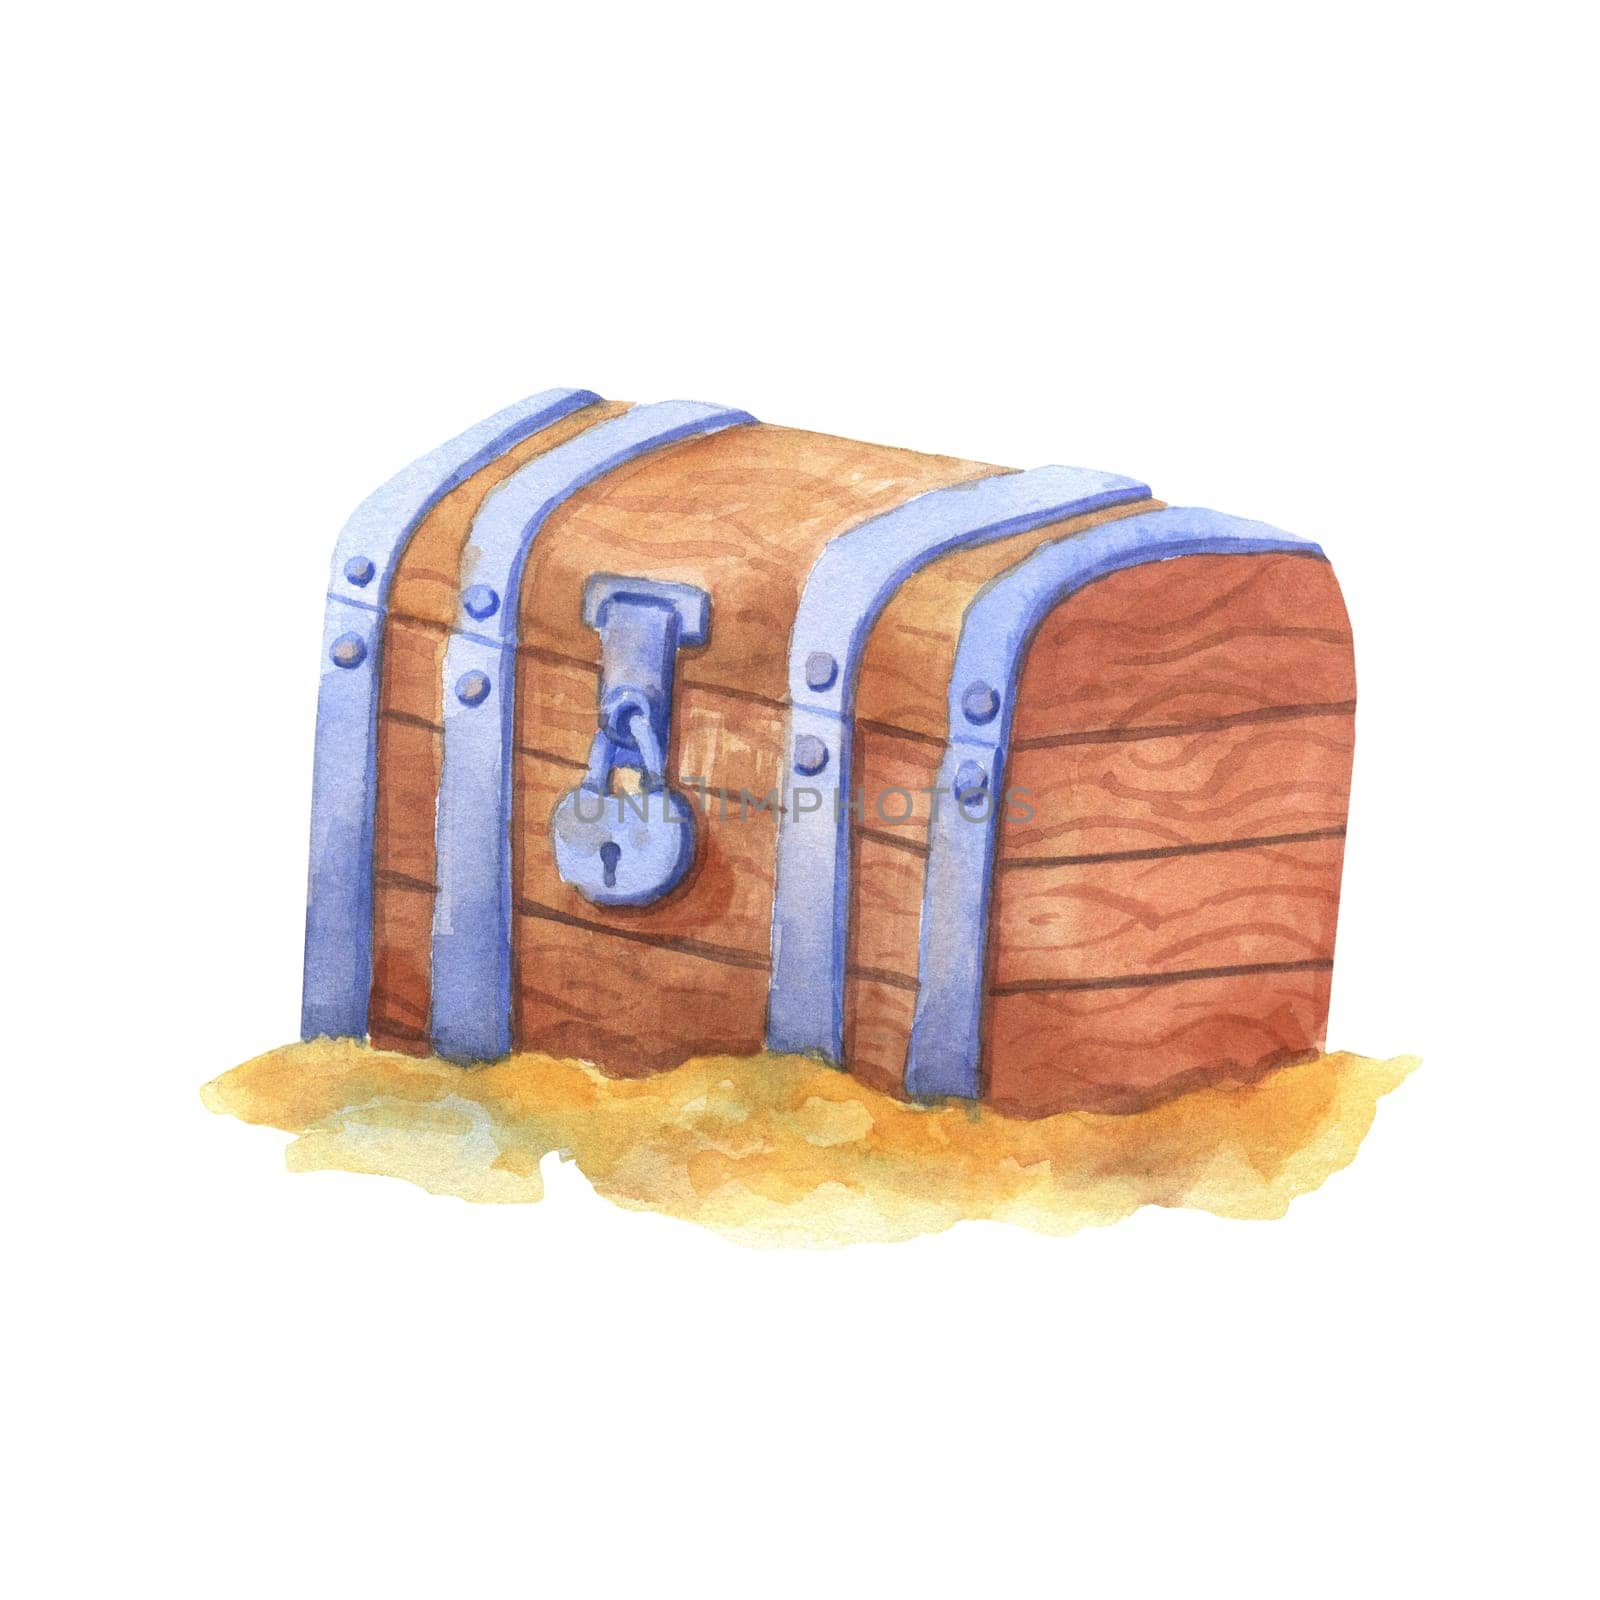 Ancient sunken closed treasure chest on sand. Watercolor illustration isolated on white background by ElenaPlatova